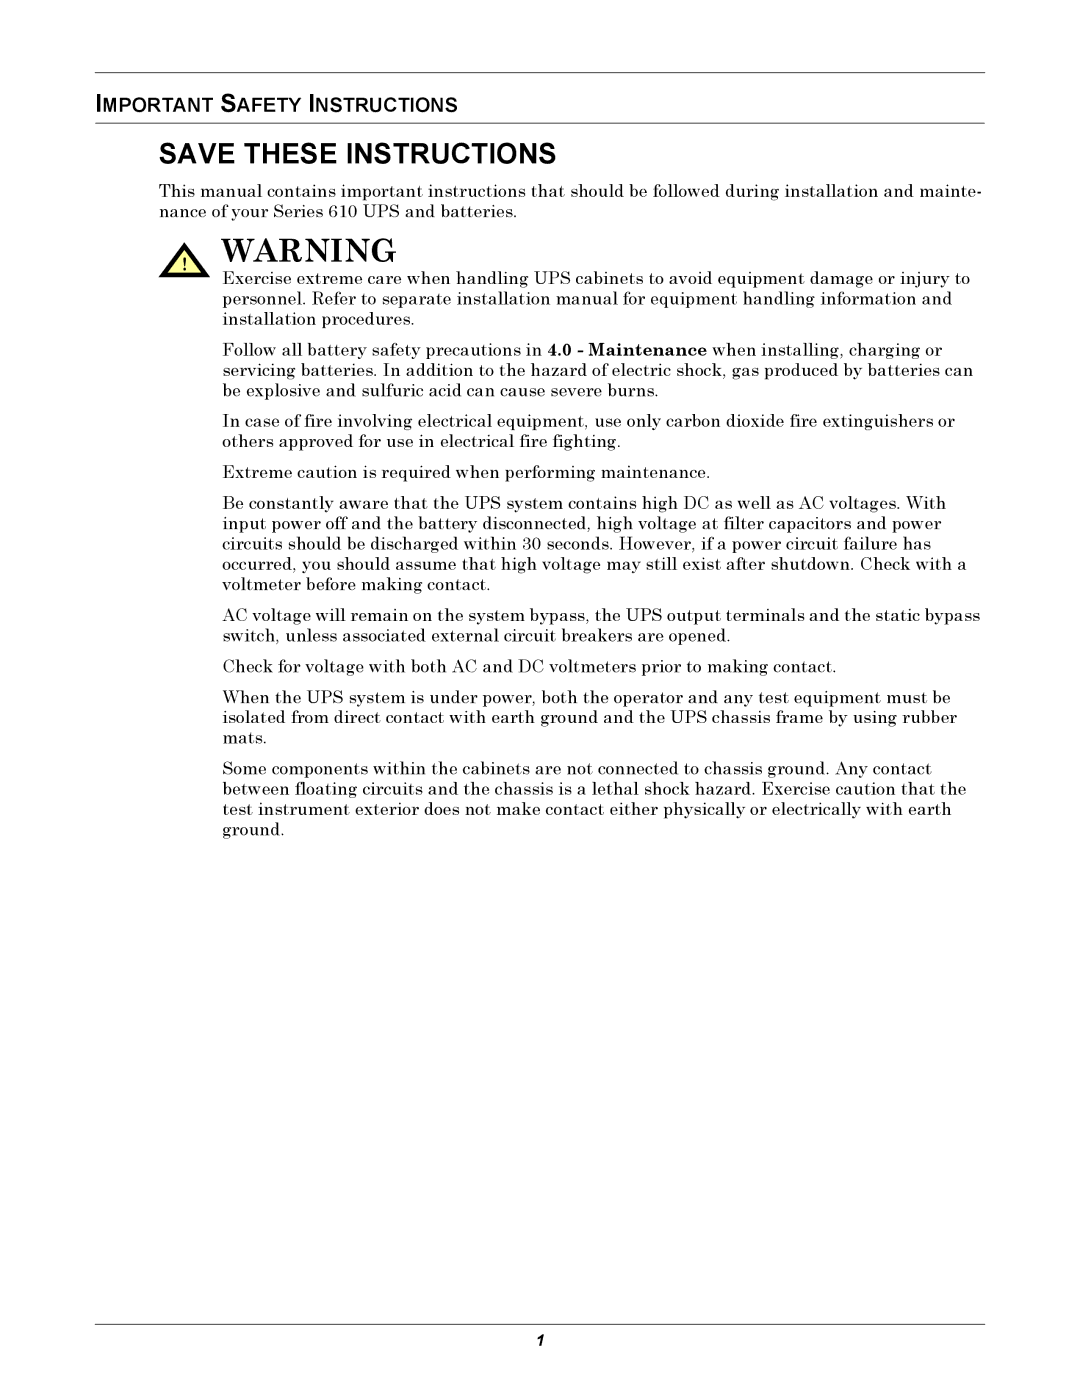 Liebert 610 manual Important Safety Instructions 